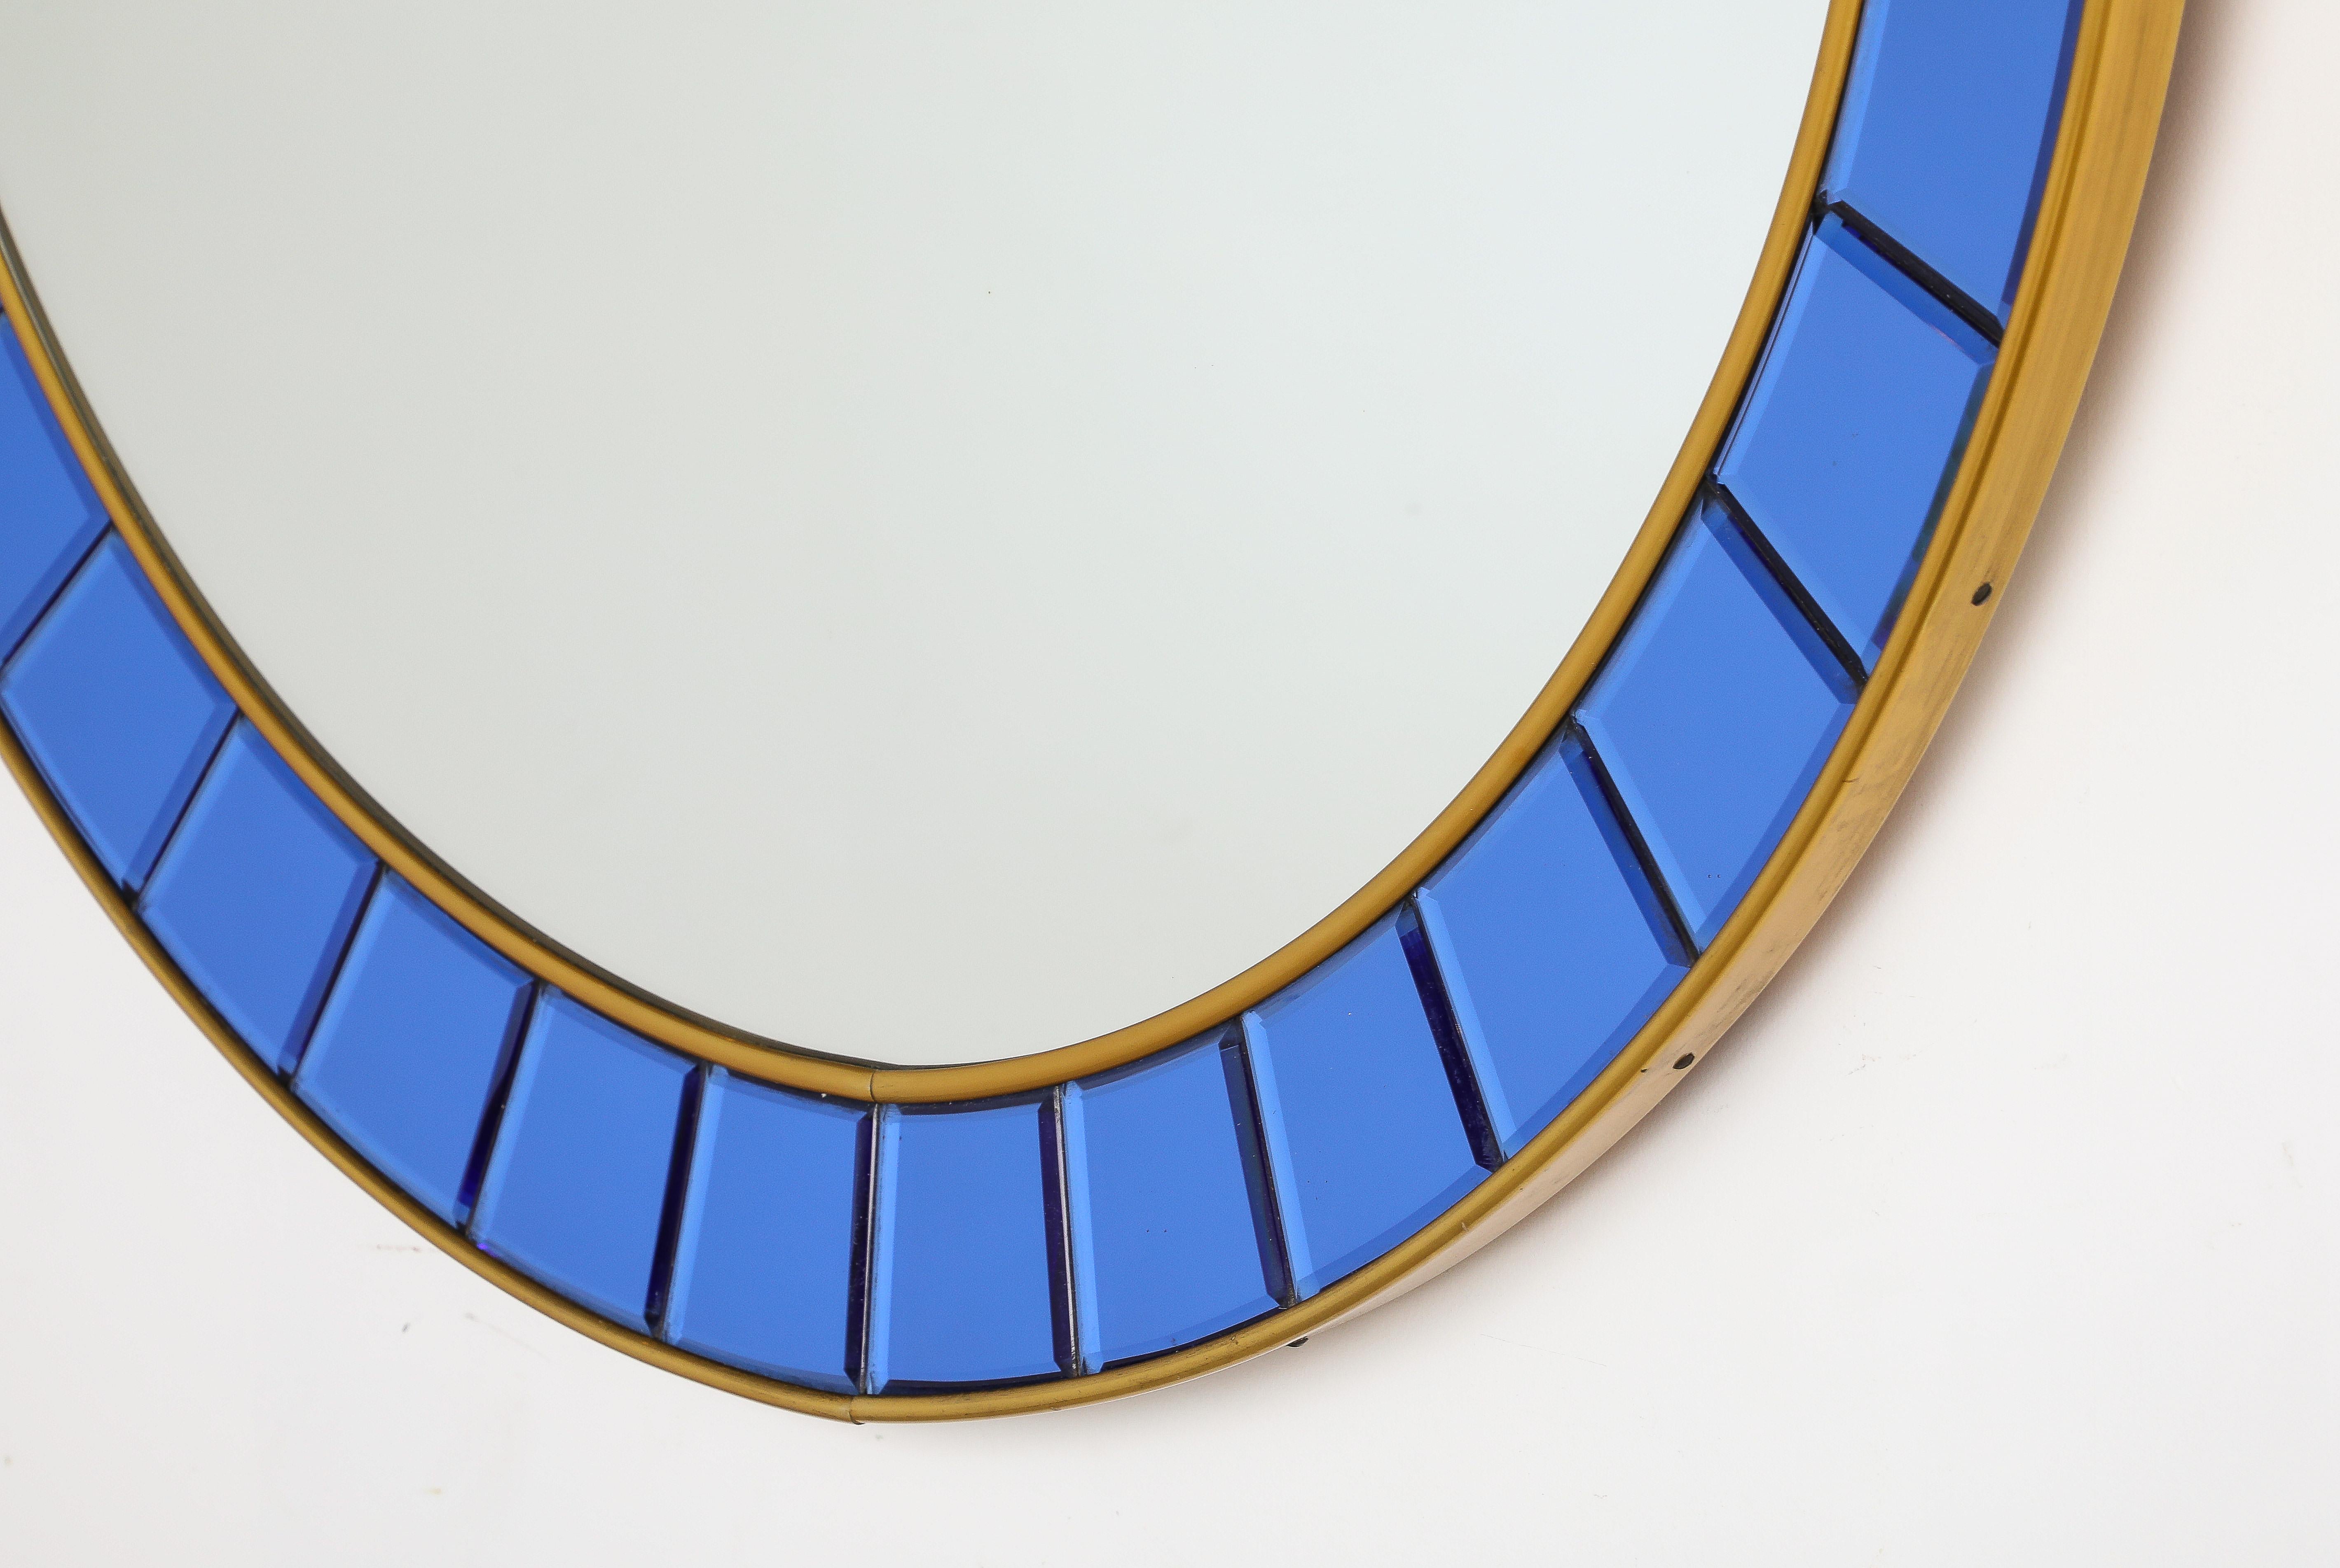 Cristal Art Circular Blue Wall Mirror No. 2679, Turin, Italy, circa 1950's  In Good Condition For Sale In New York, NY